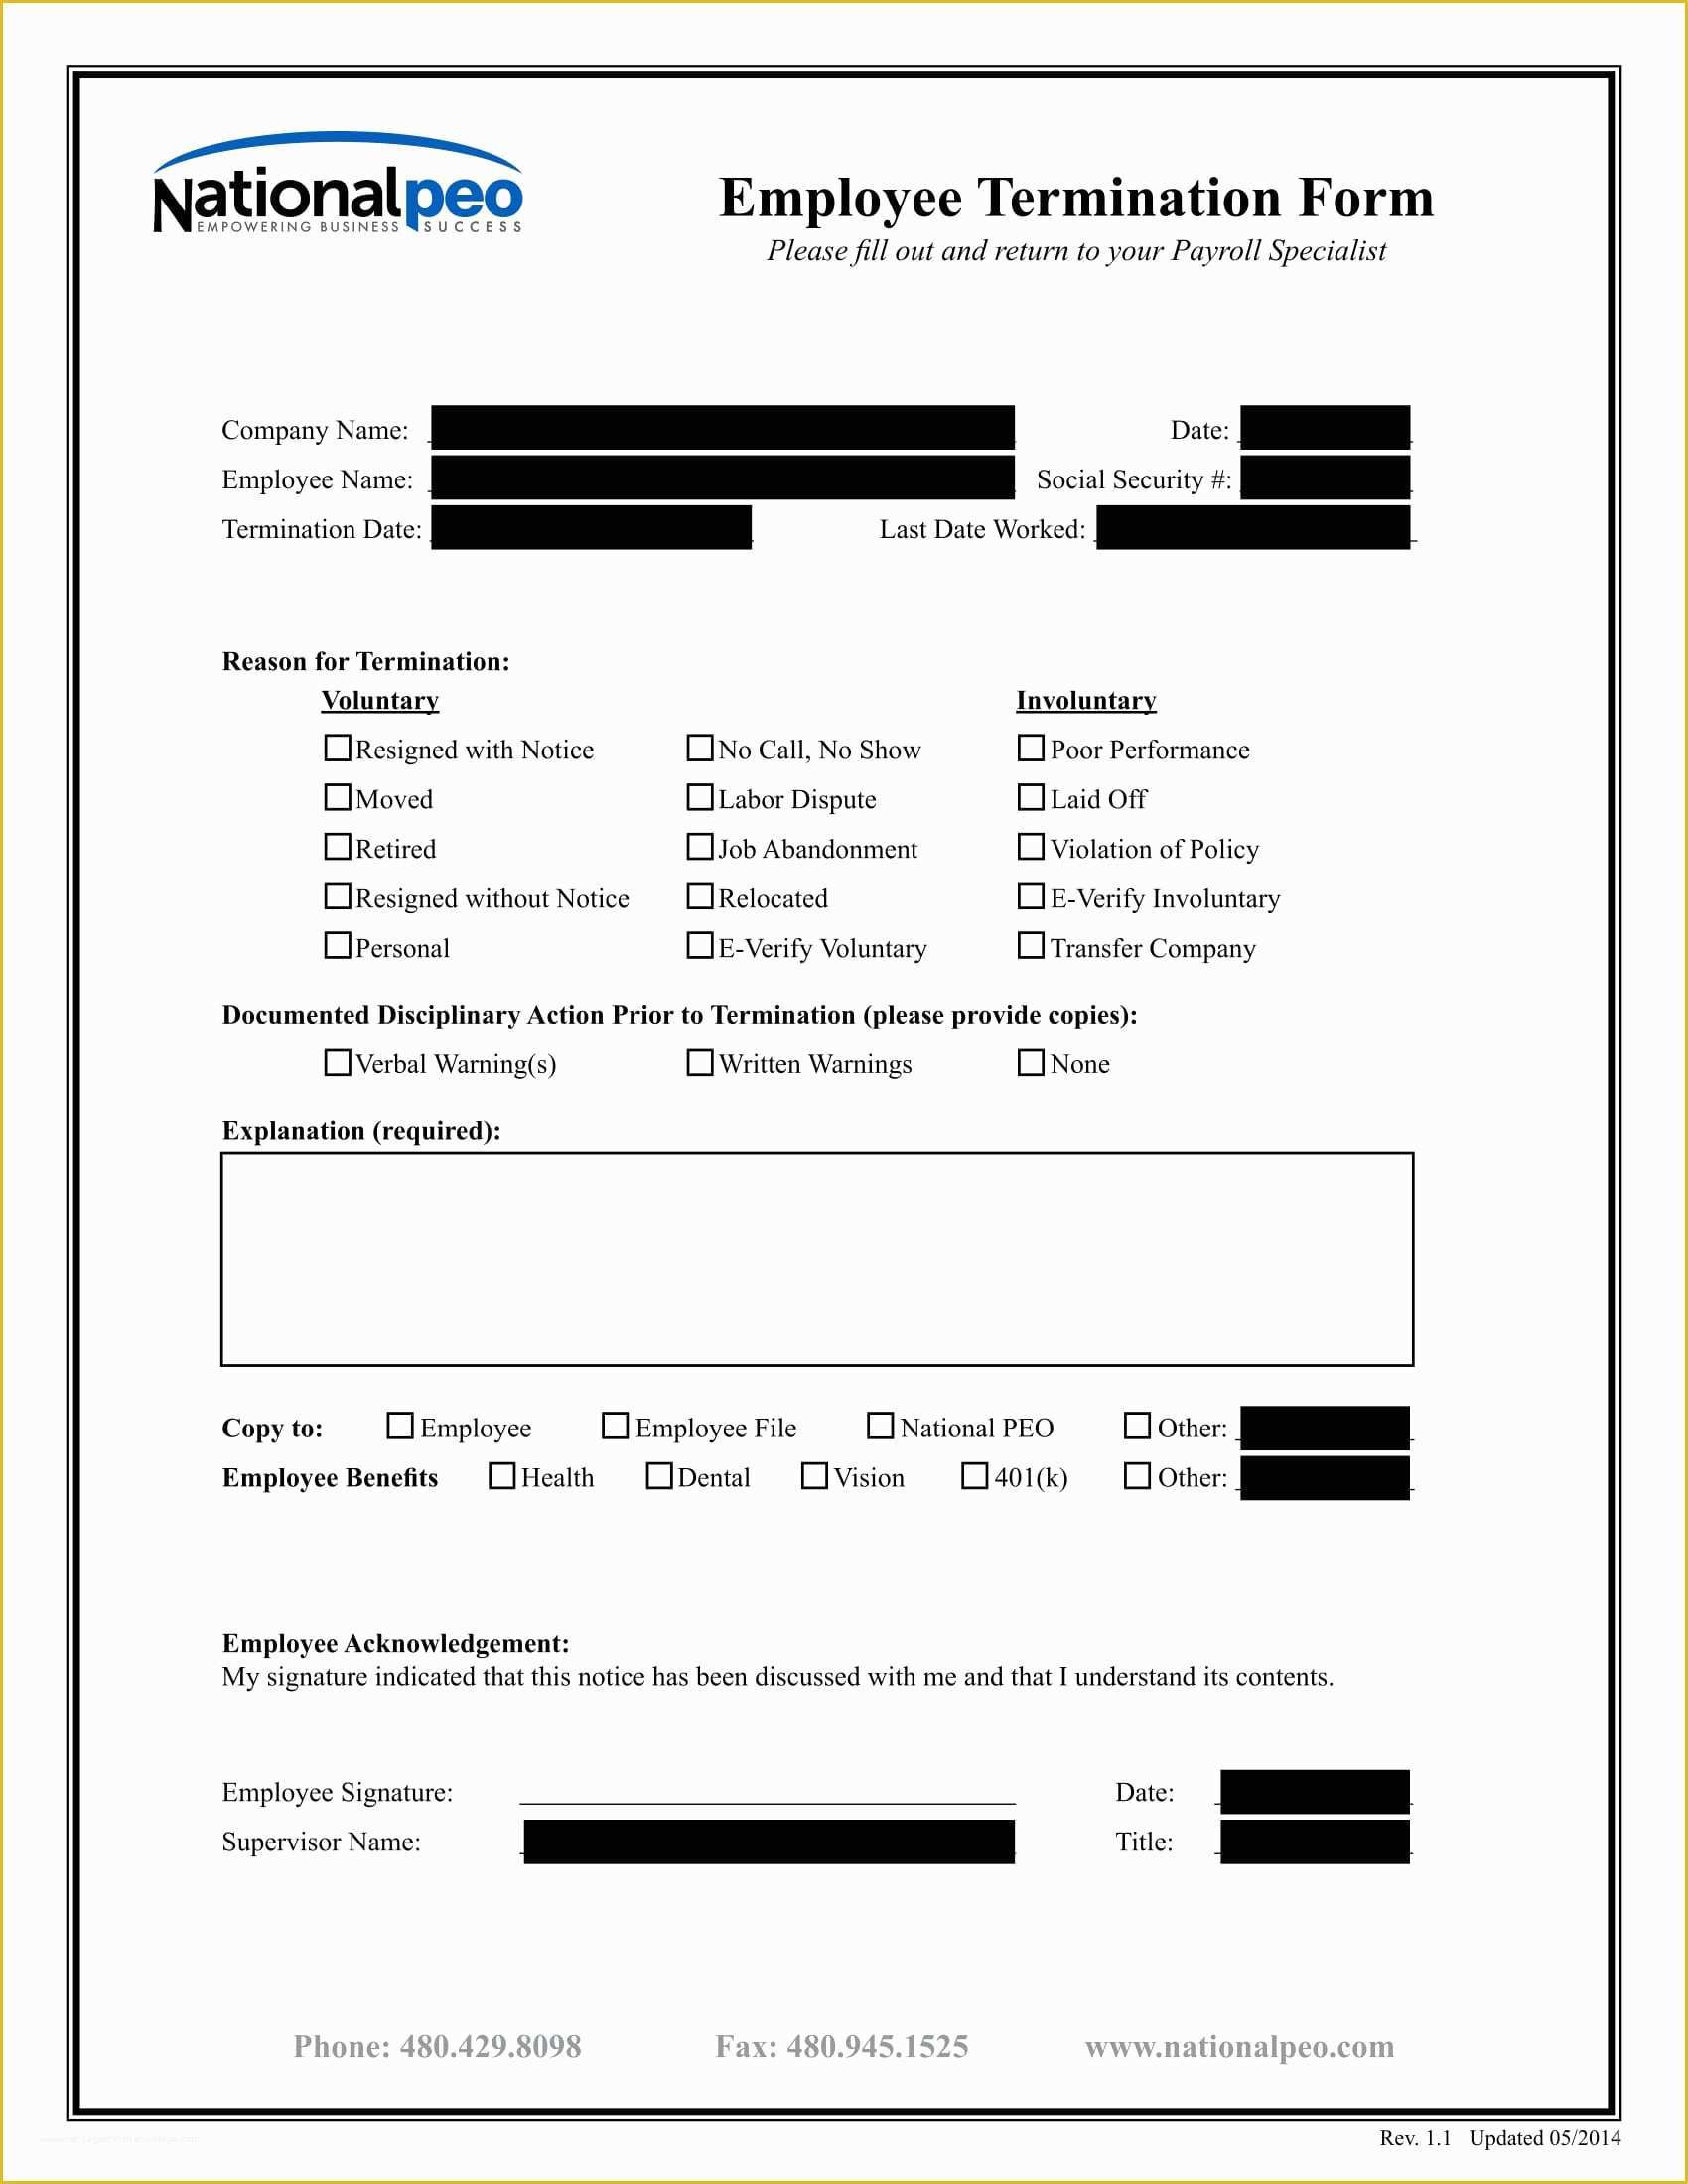 Termination form Template Free Of 3 Employee Termination forms Word Pdf